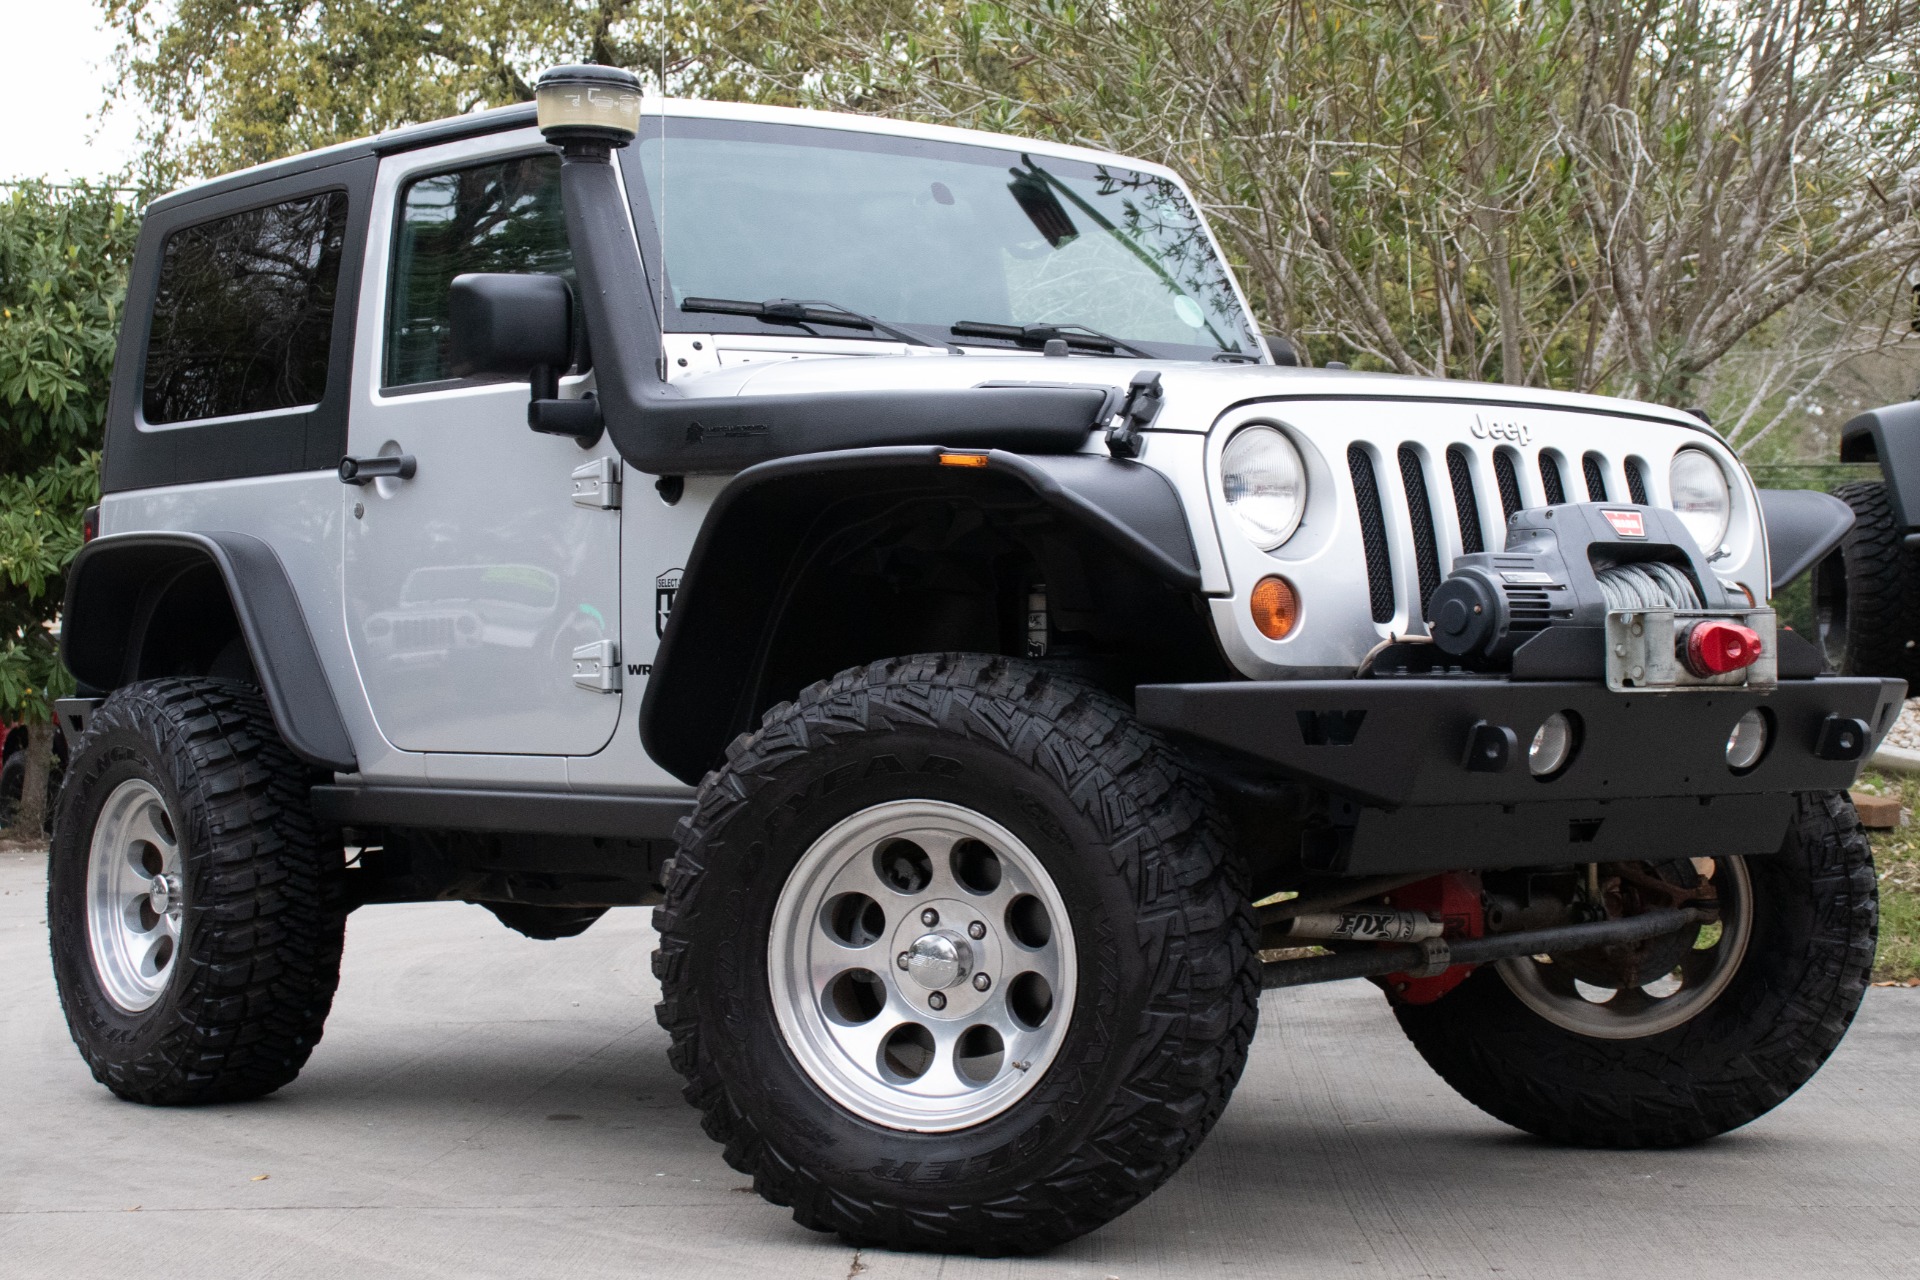 Used 2007 Jeep Wrangler Rubicon For Sale ($18,995) | Select Jeeps Inc.  Stock #132192